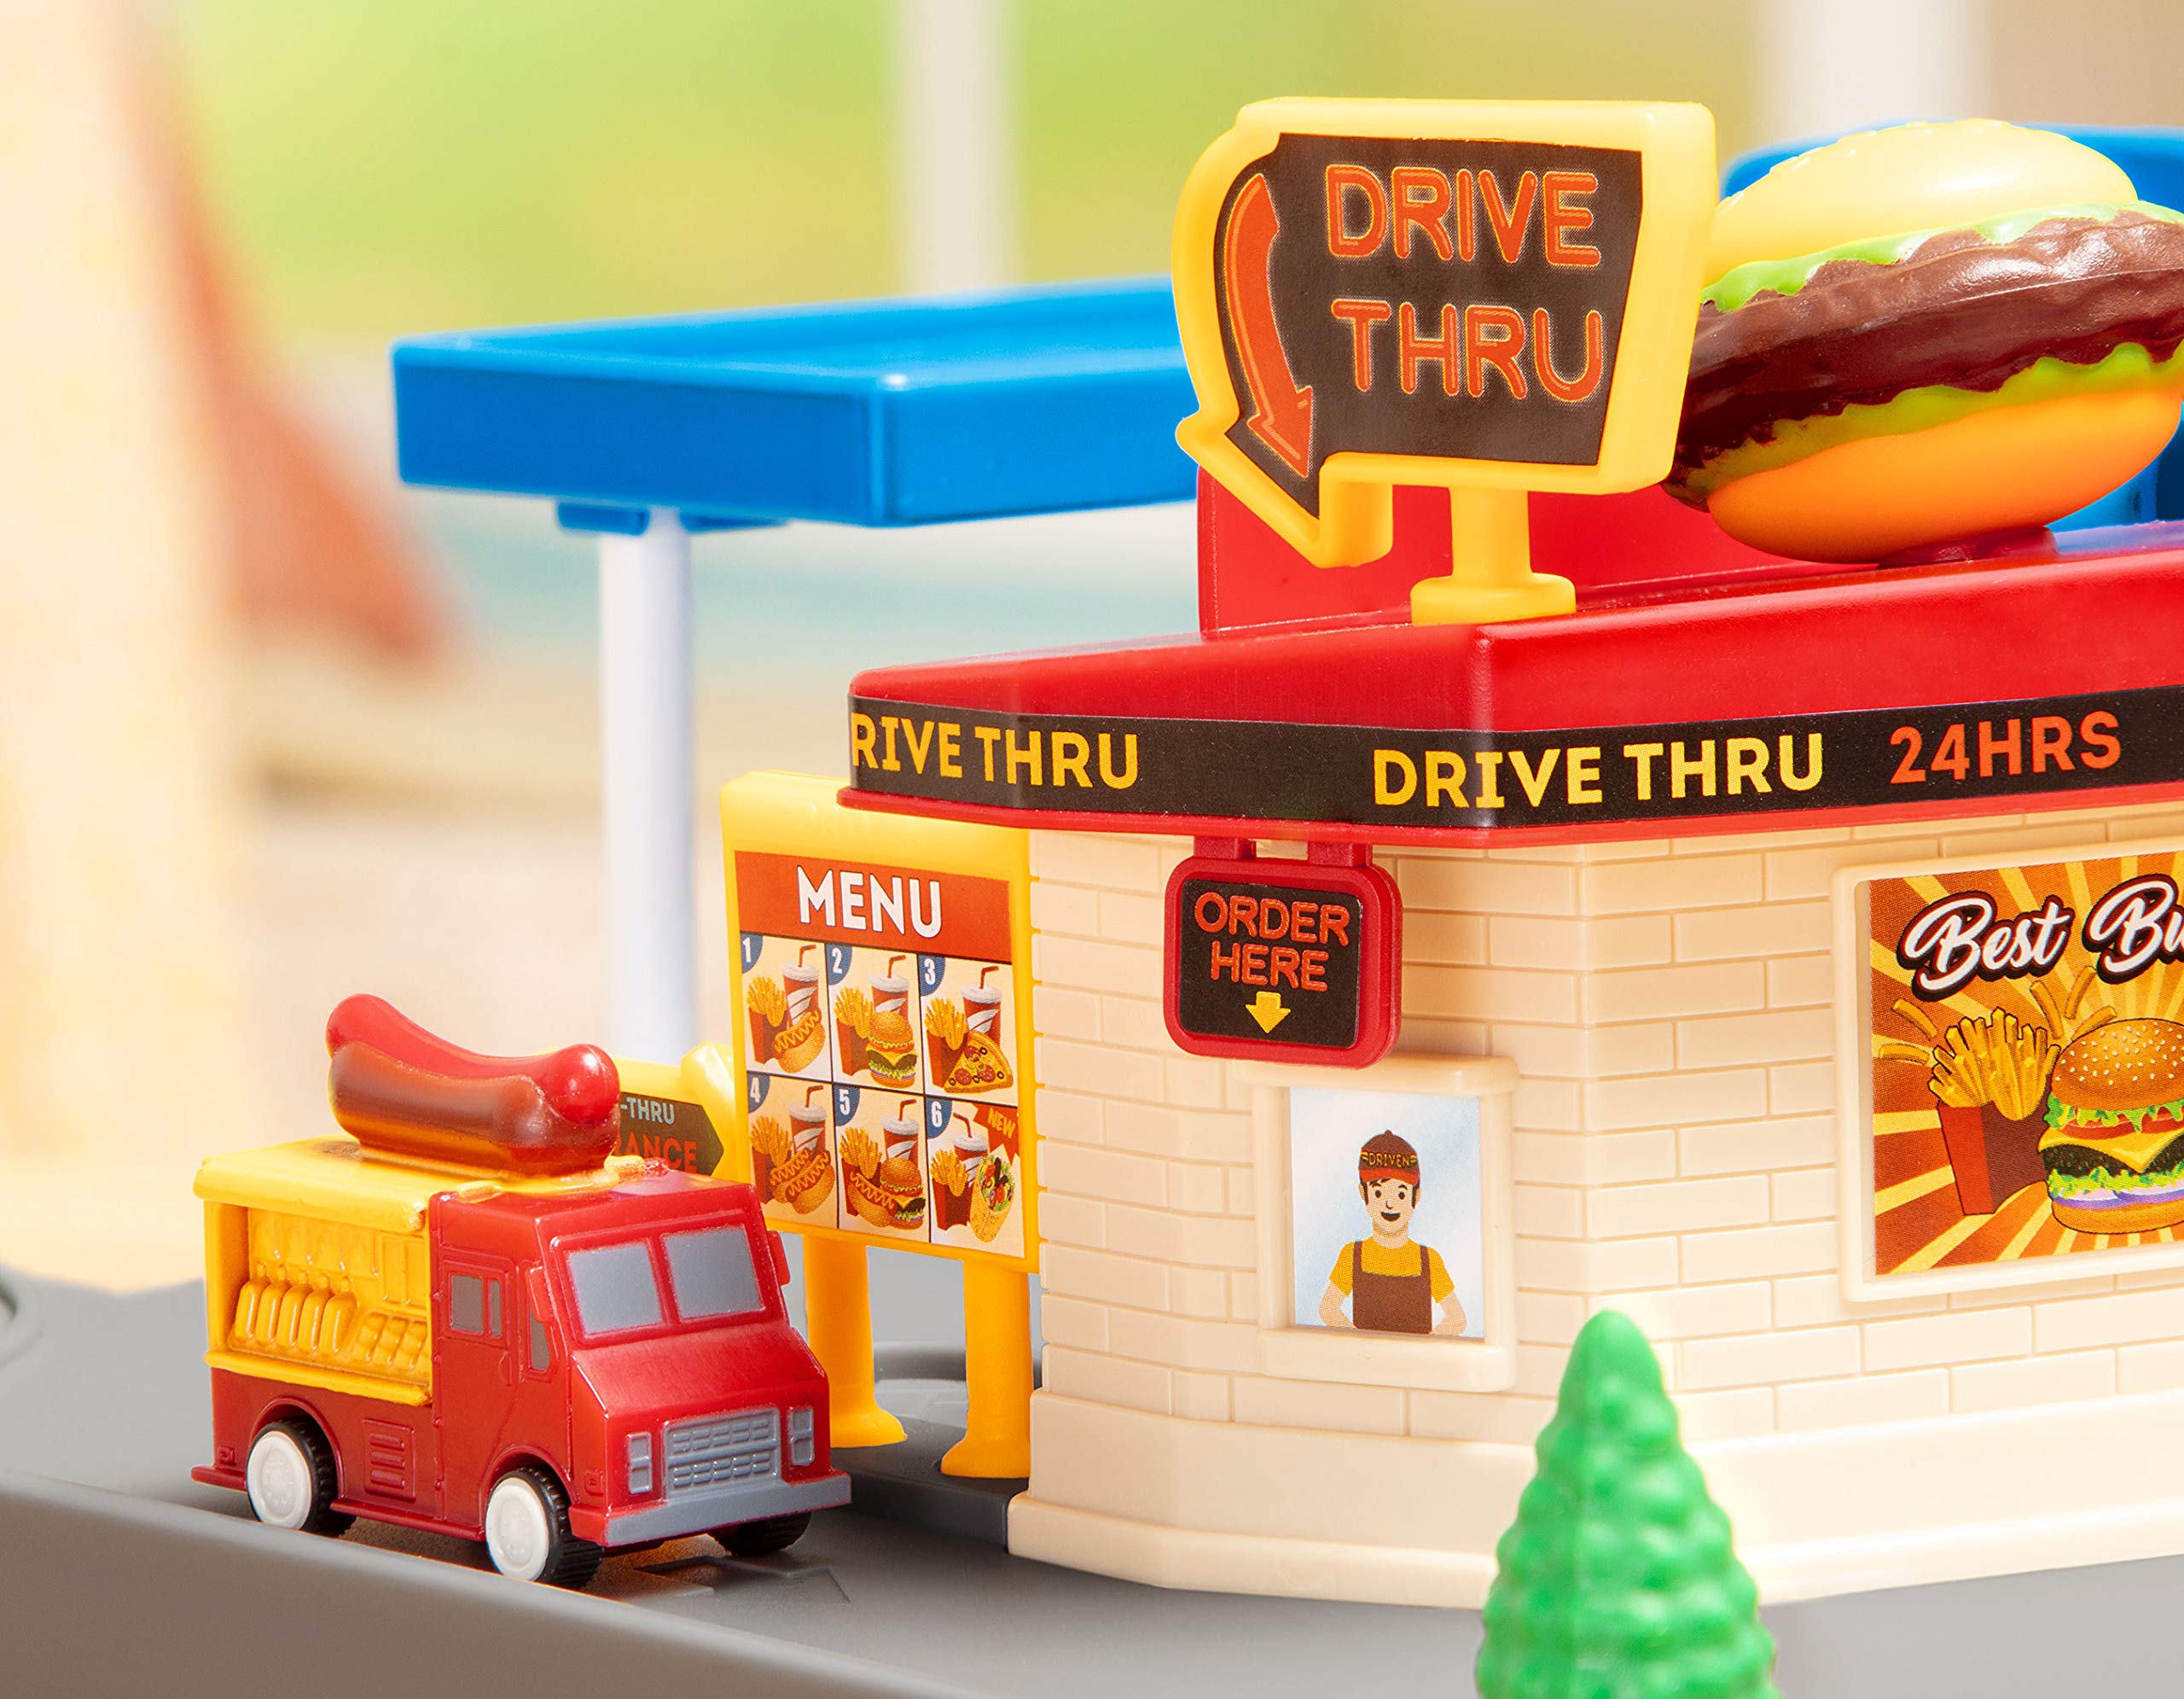 Driven by Battat – Gas Station & Drive-Thru Restaurant Playset – Toy Car Accessories for Kids – 5-Piece Set with Toy Food Truck – Toy Car Playset – 3 Years + – Pocket Dine & Drive Pit Stop (5pc)